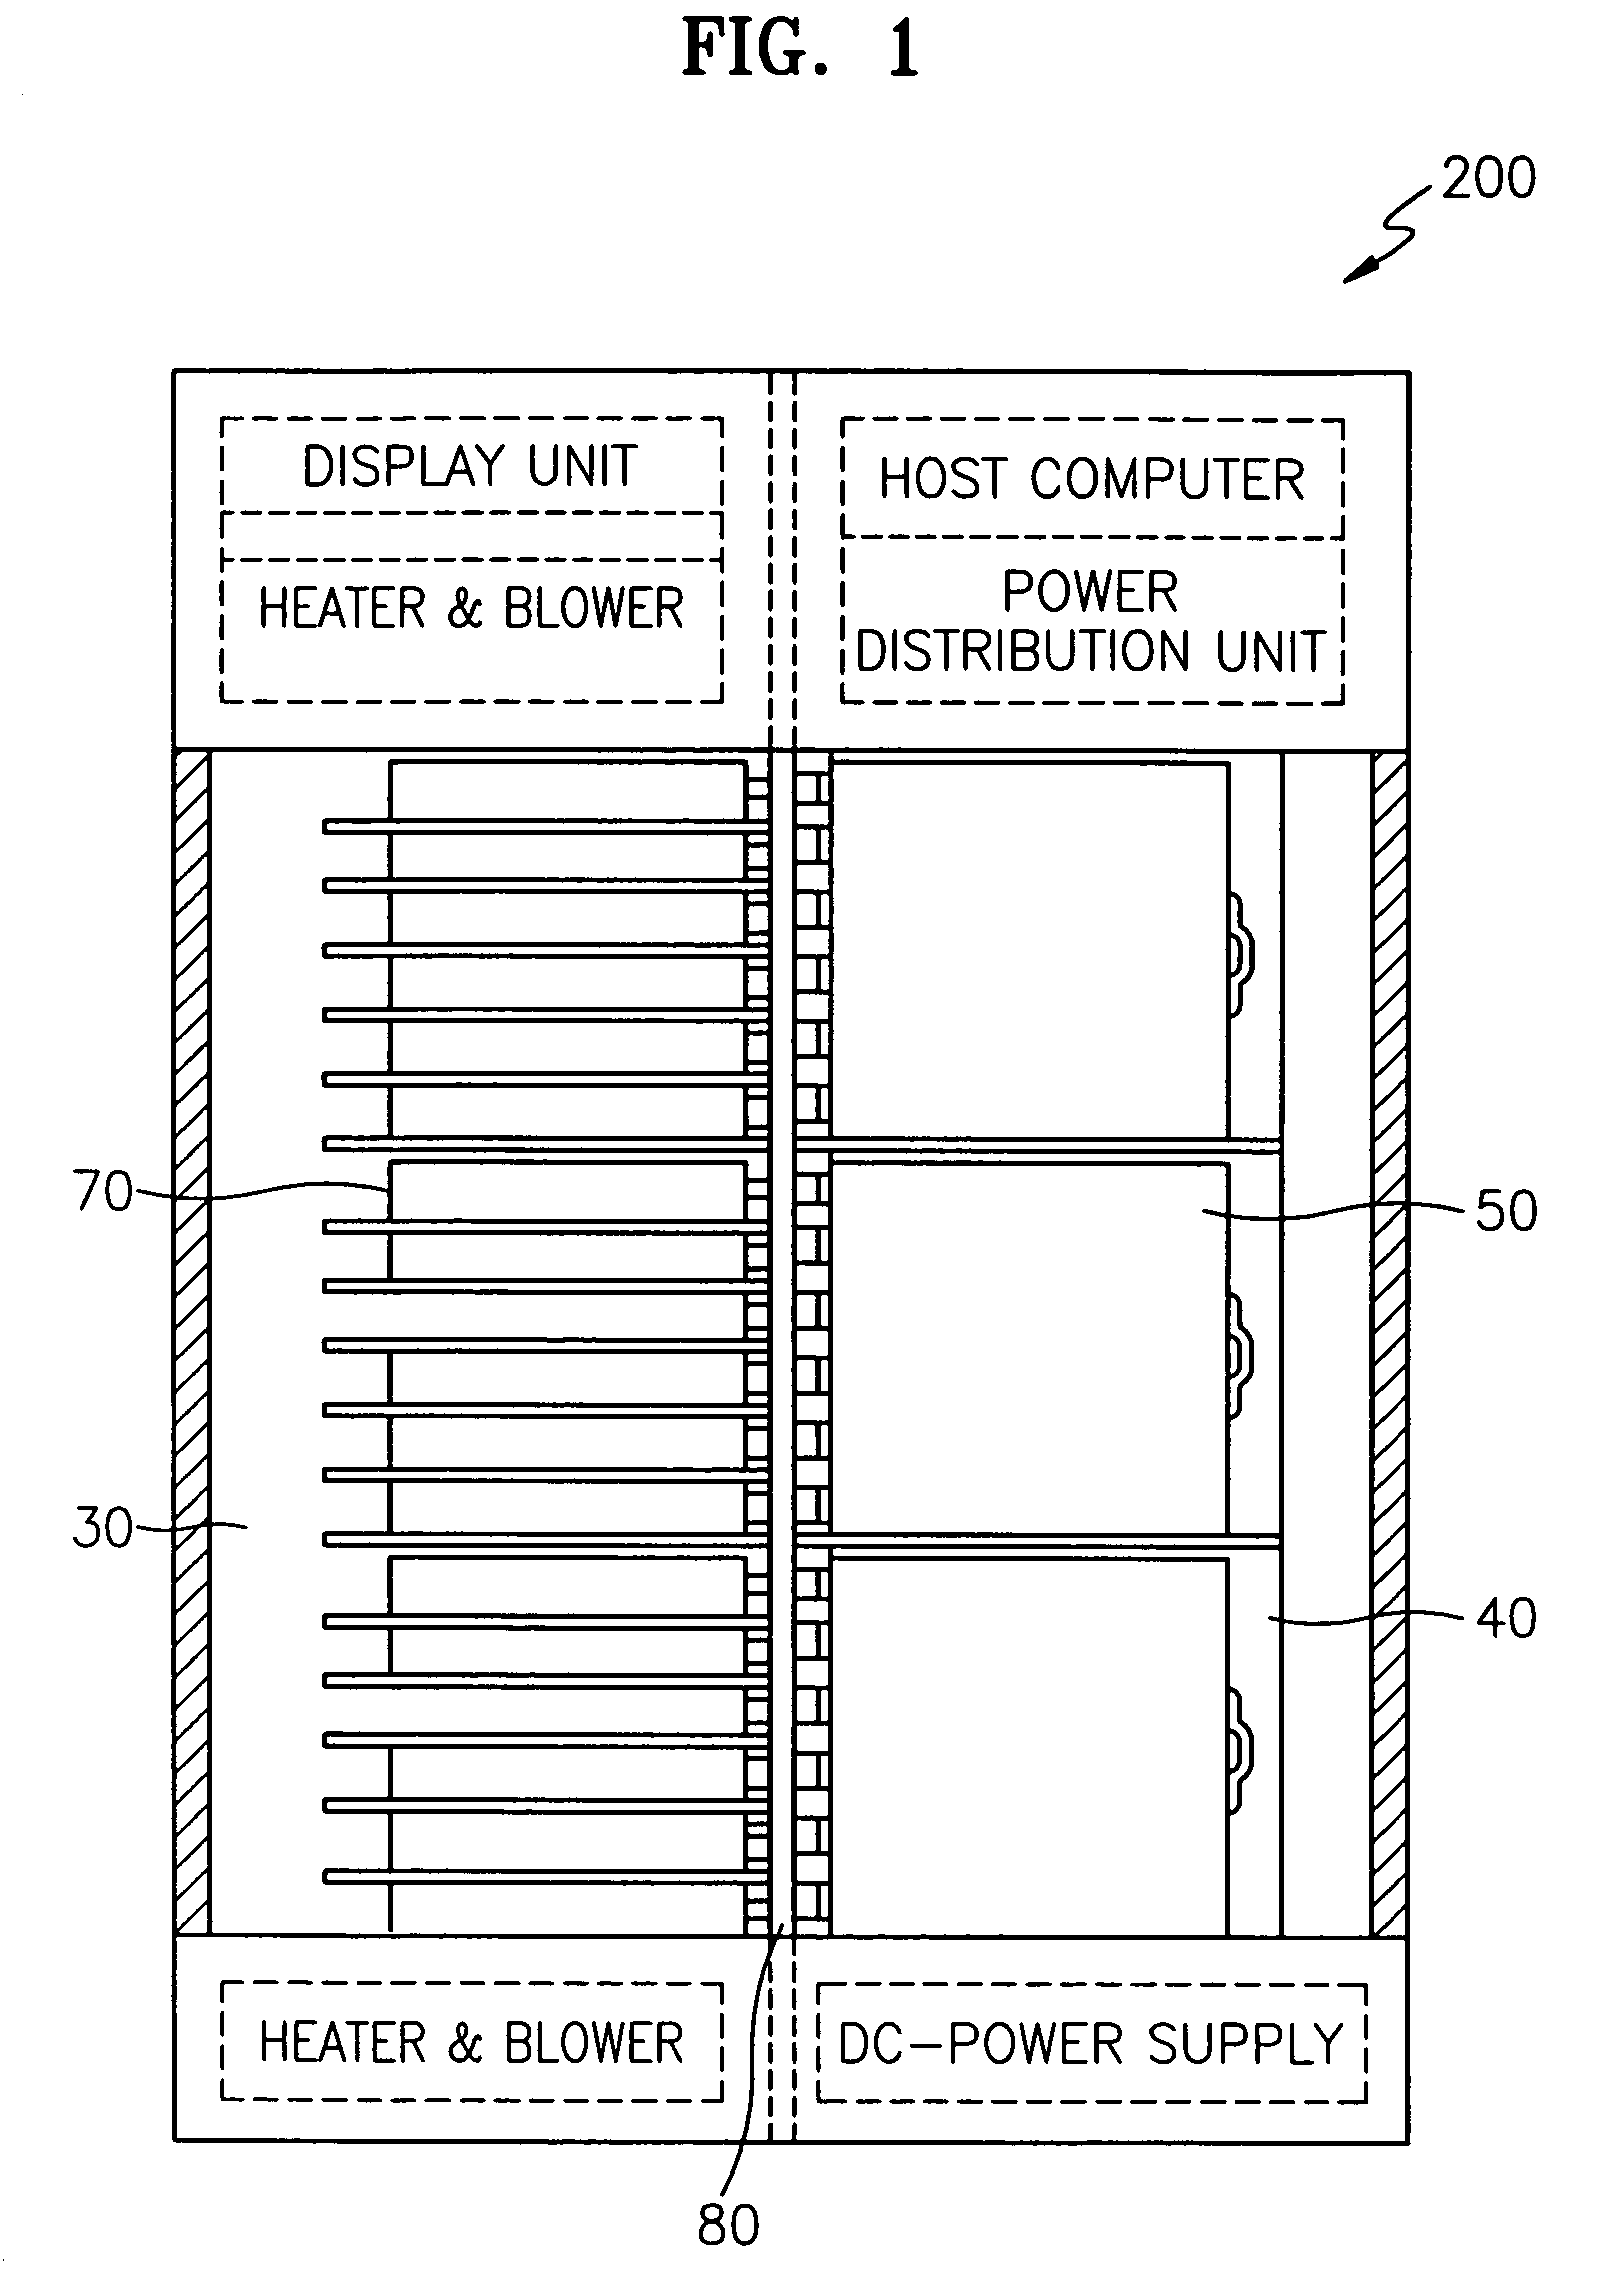 Apparatus for testing hard disk drive